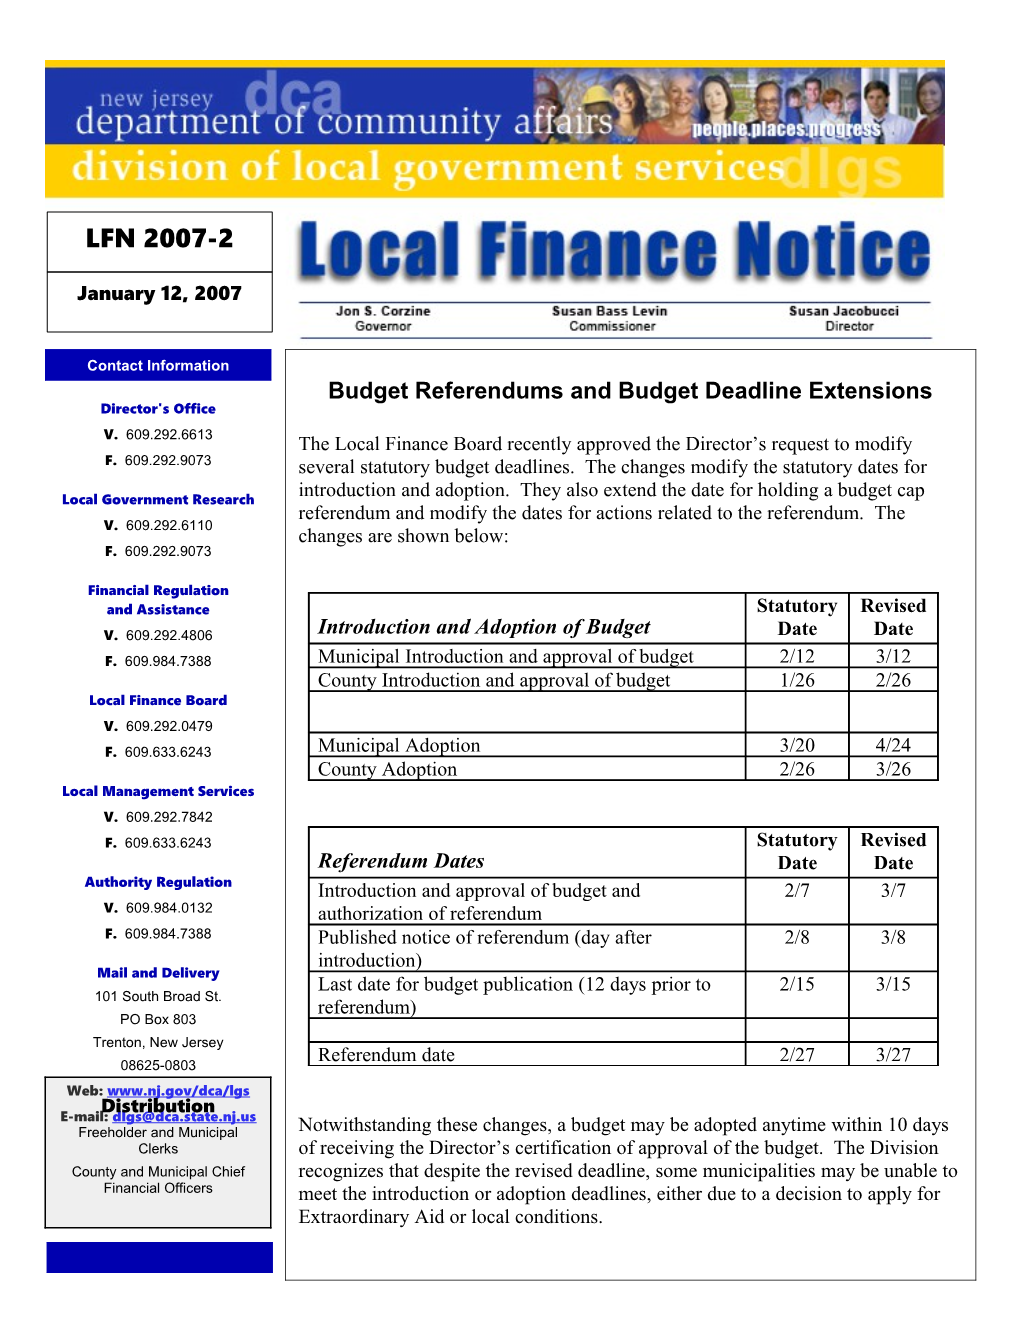 Local Finance Notice 2007-2January 12, 2007Page 1